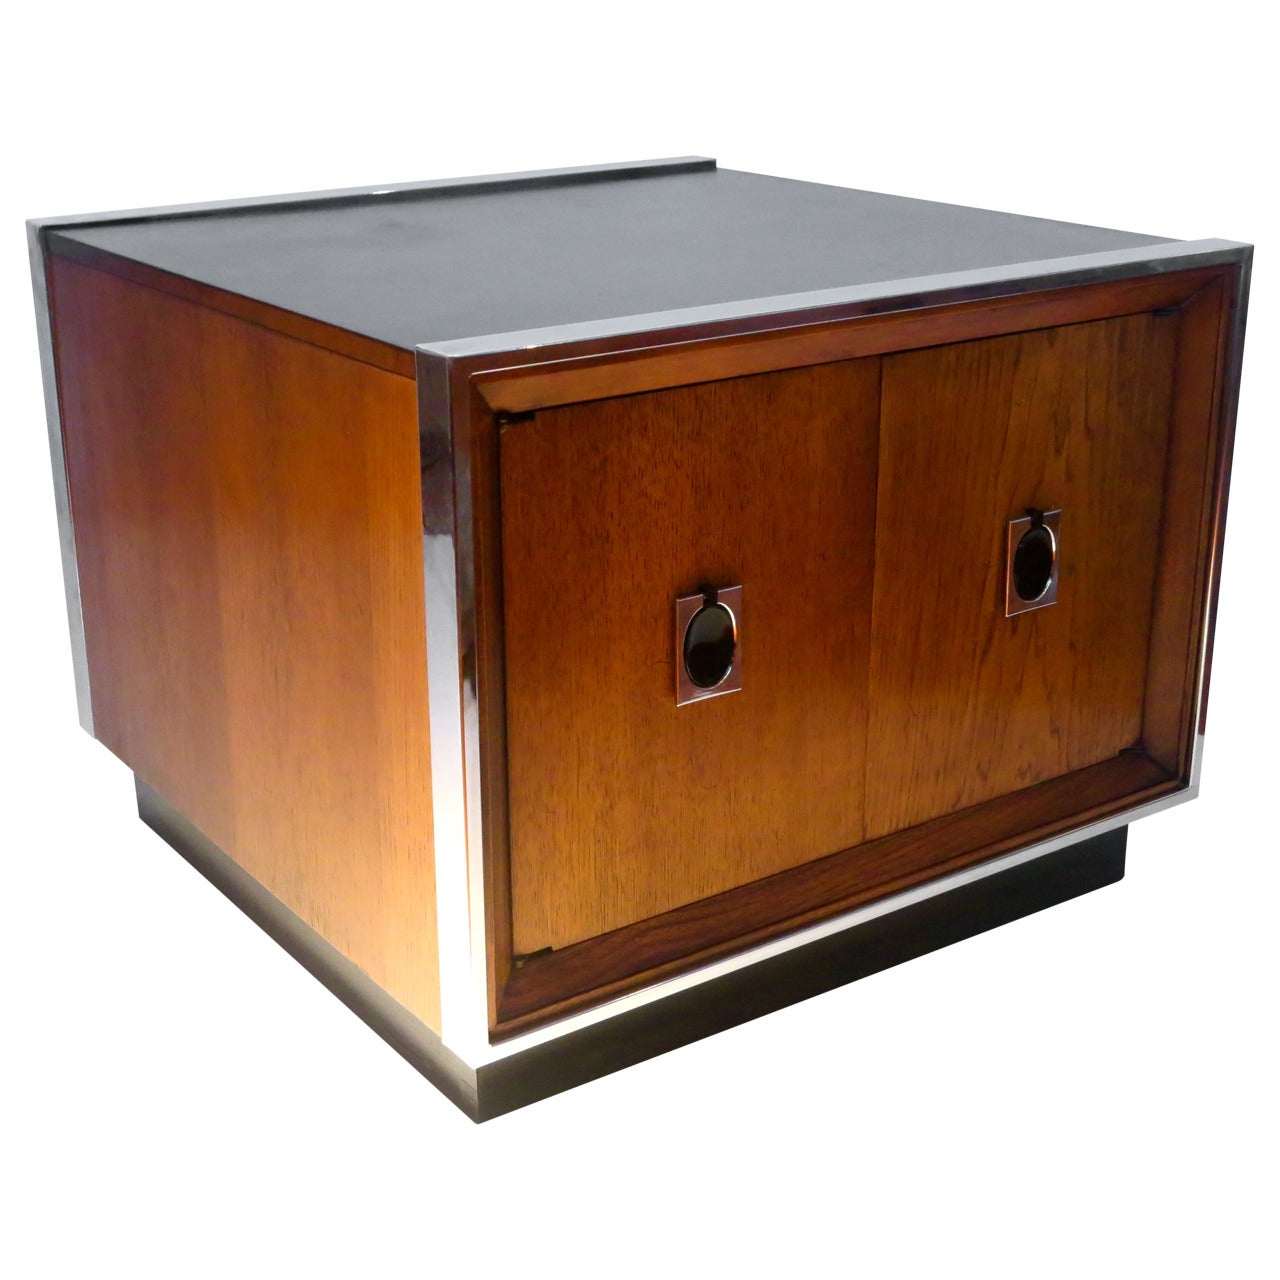 American Modern Cocktail or End Table or Cabinet in Walnut and Chrome